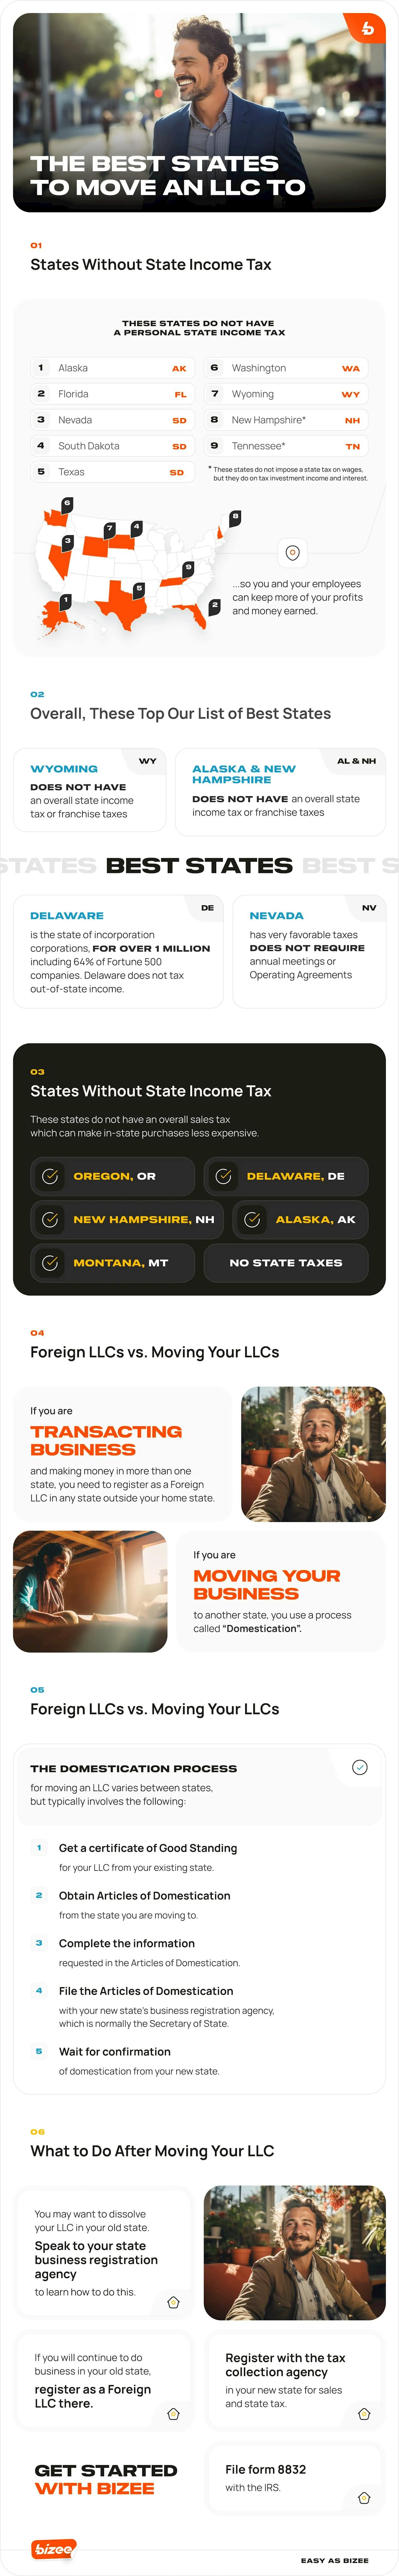 The best states to move your LLC - infographic